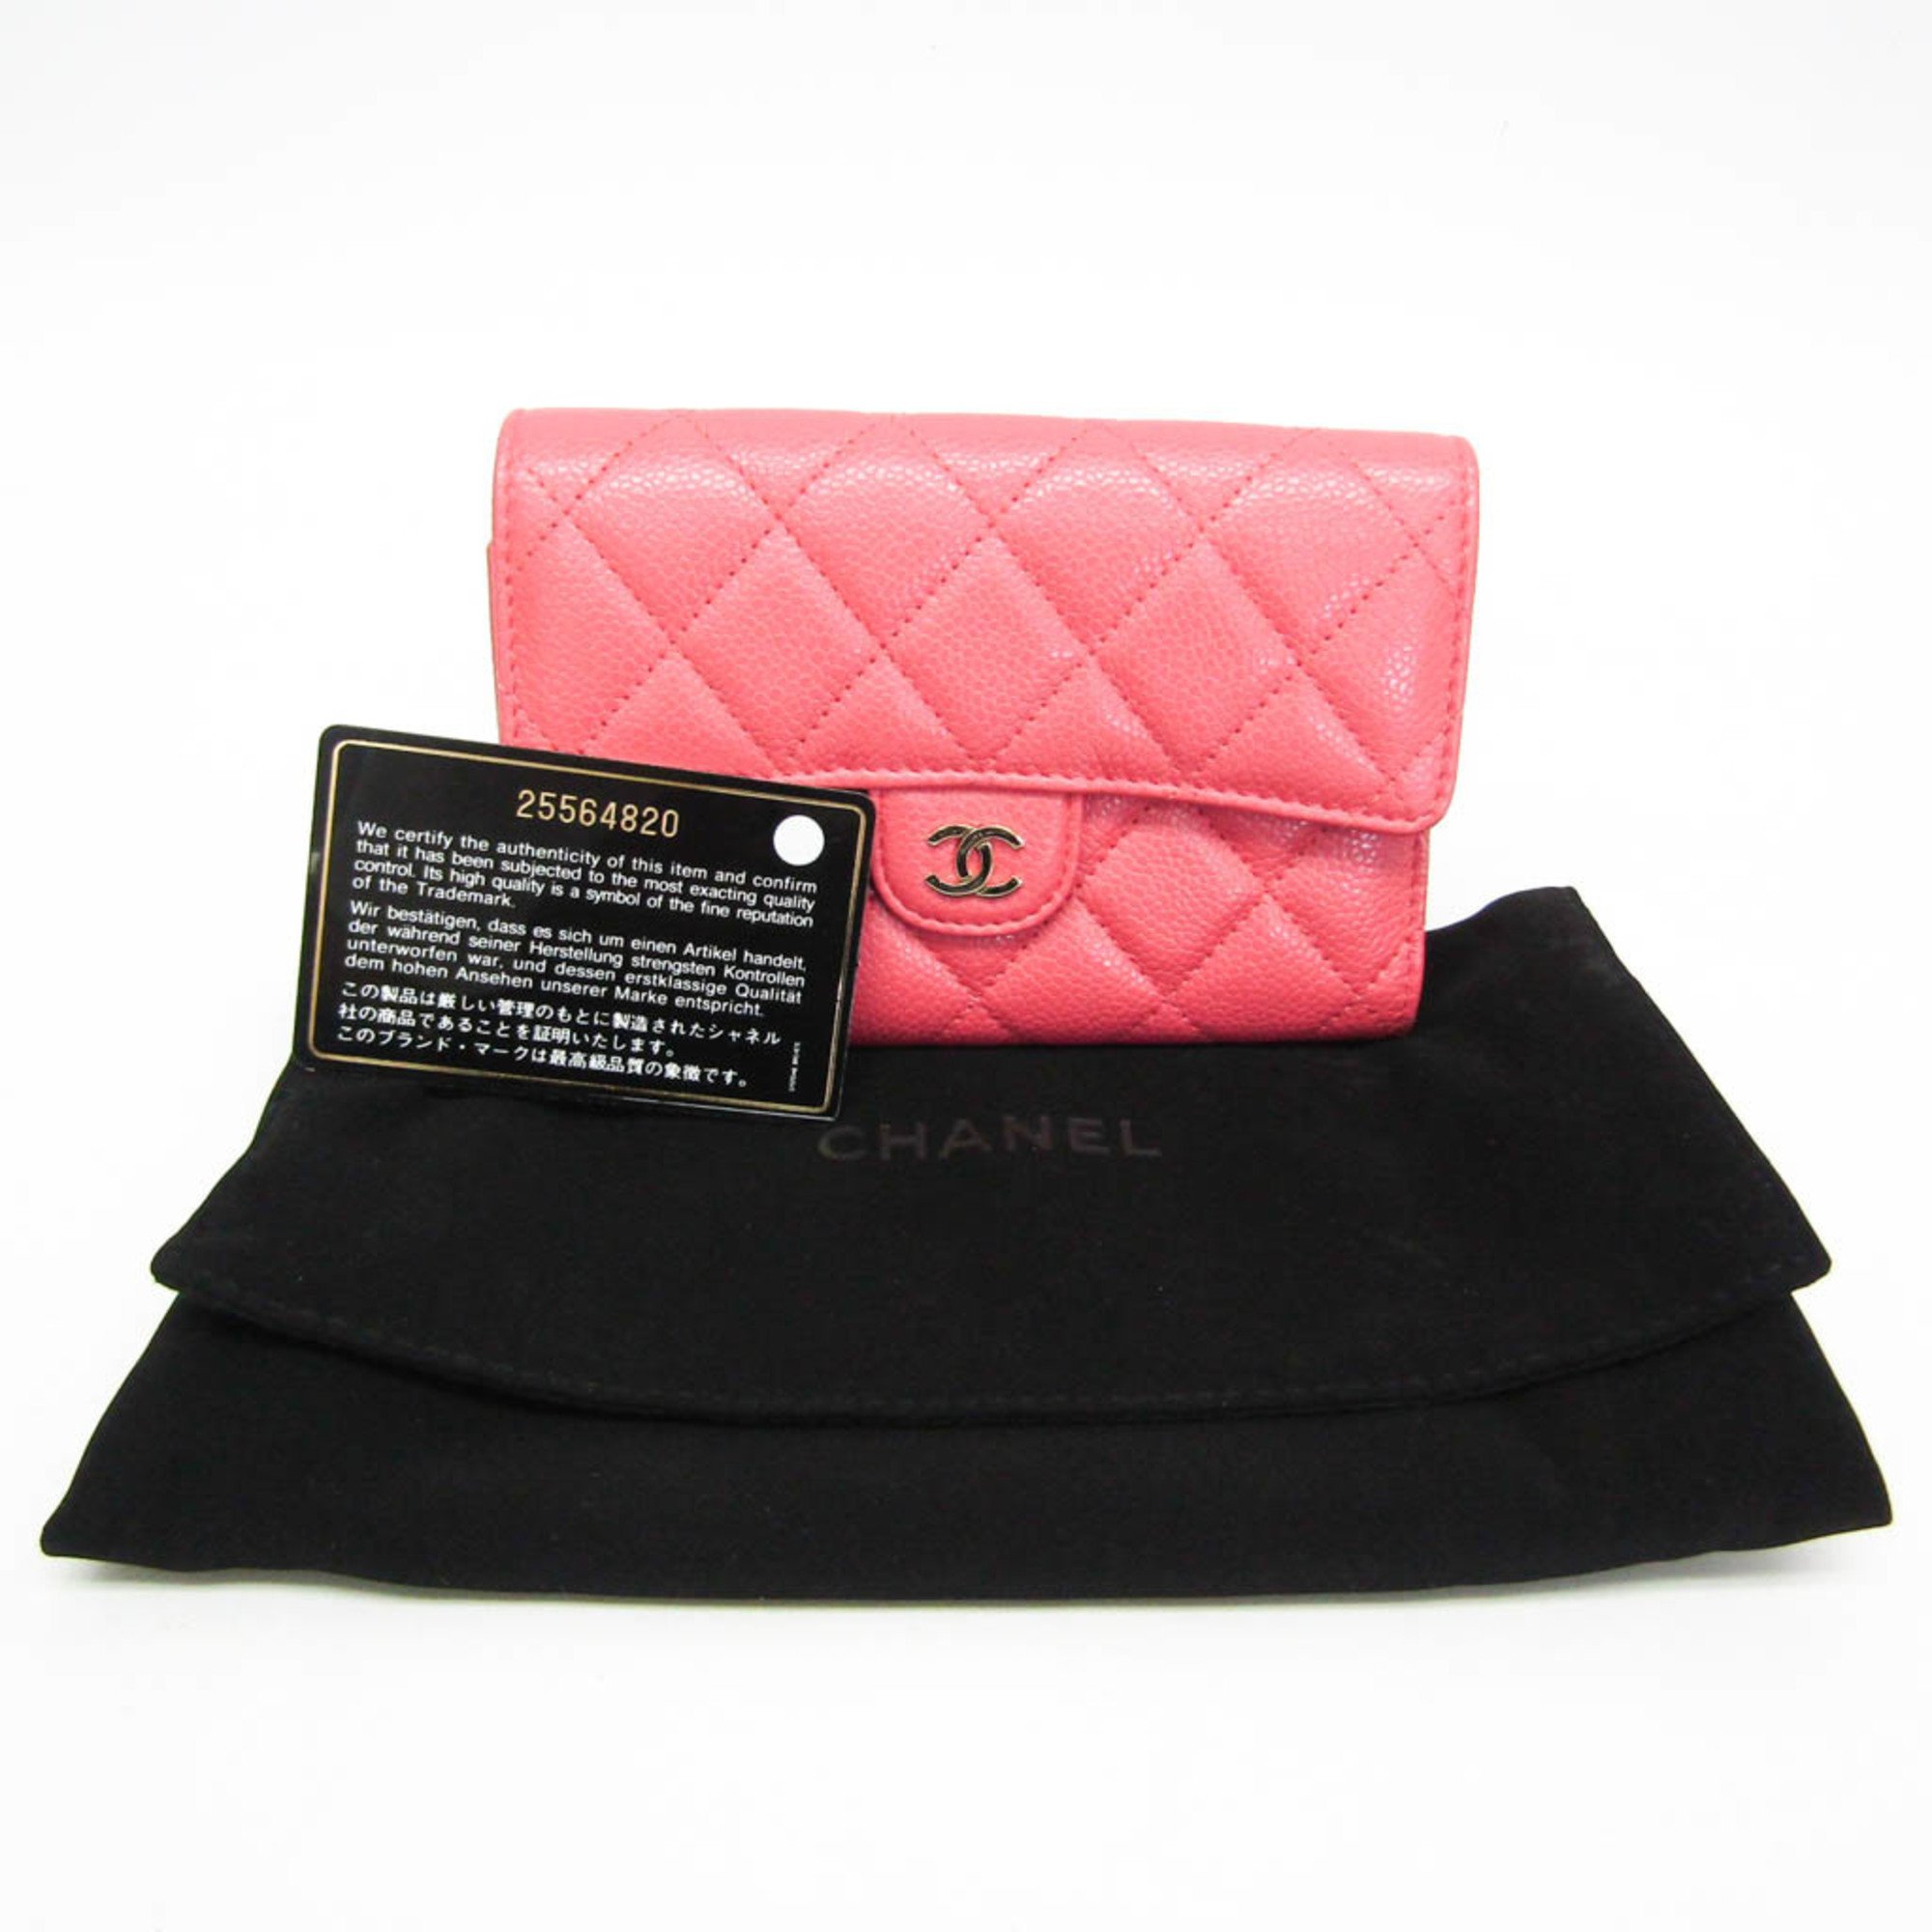 Chanel Matelasse Women's Caviar Leather Middle Wallet (tri-fold) Pink